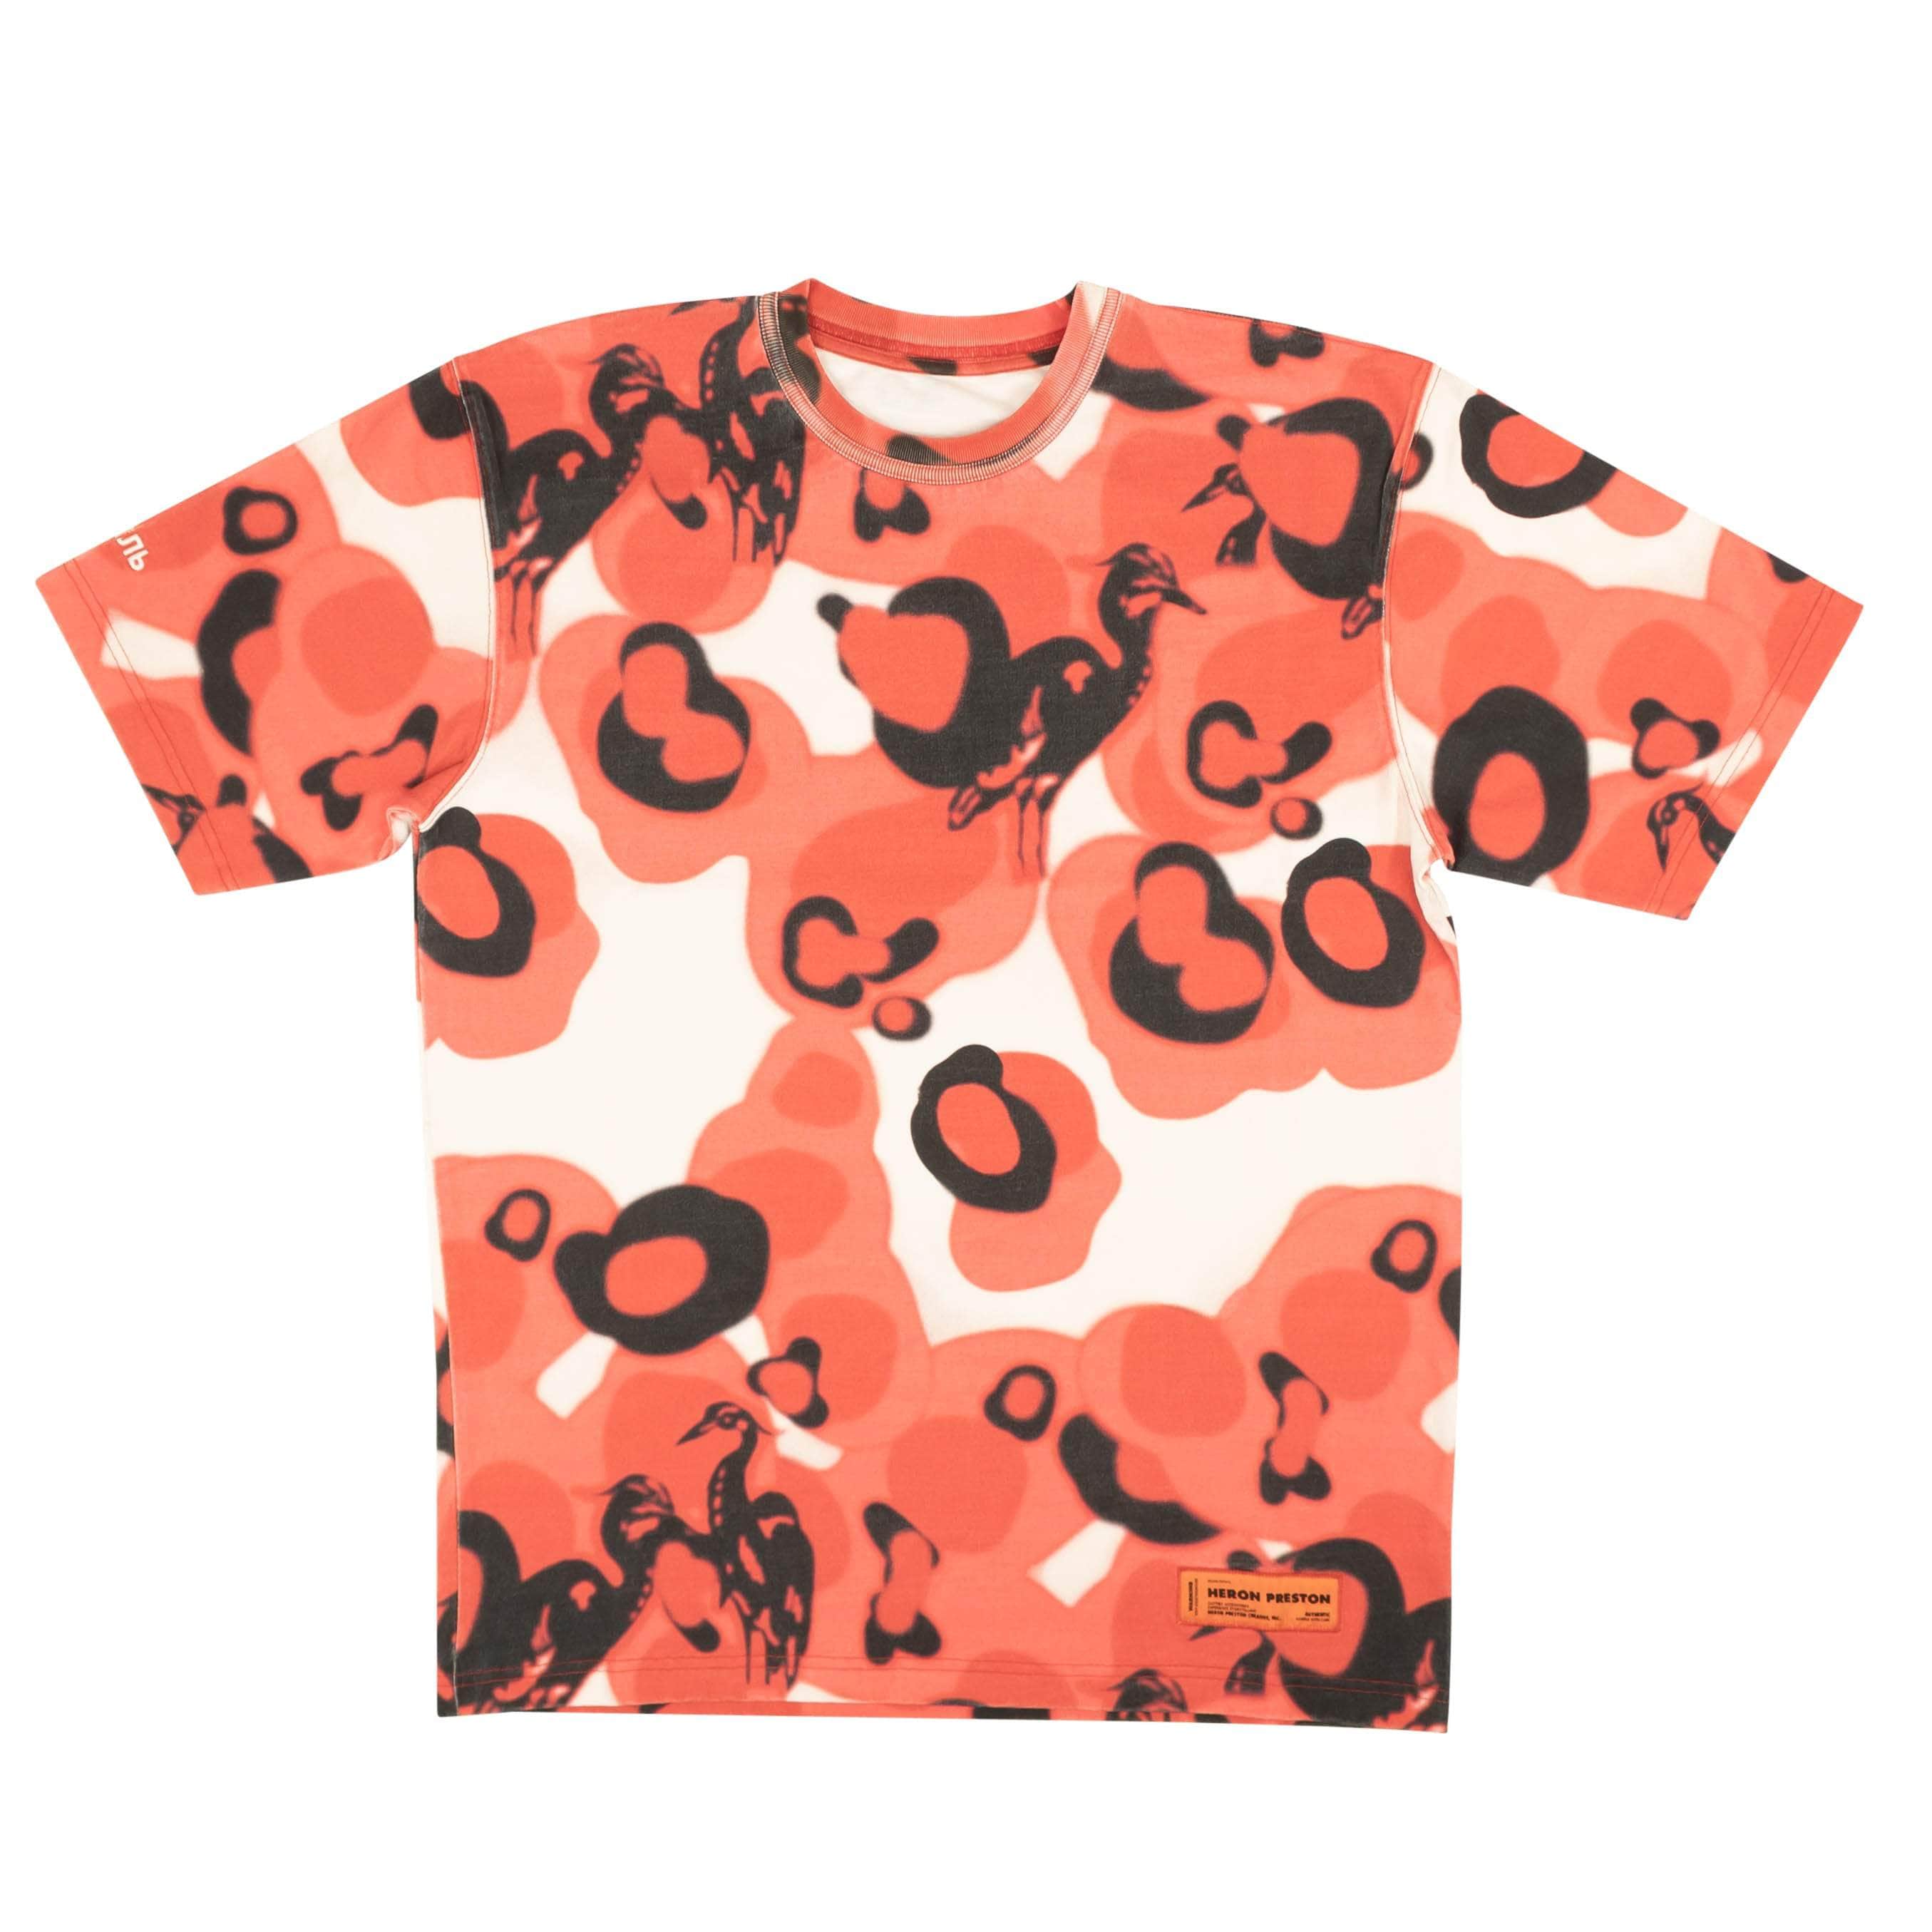 Heron Preston 250-500, channelenable-all, chicmi, couponcollection, gender-mens, heron-preston, main-clothing, mens-shoes, size-m, size-s S Red Washed Camo Short Sleeve T-Shirt 95-HRP-1007/S 95-HRP-1007/S